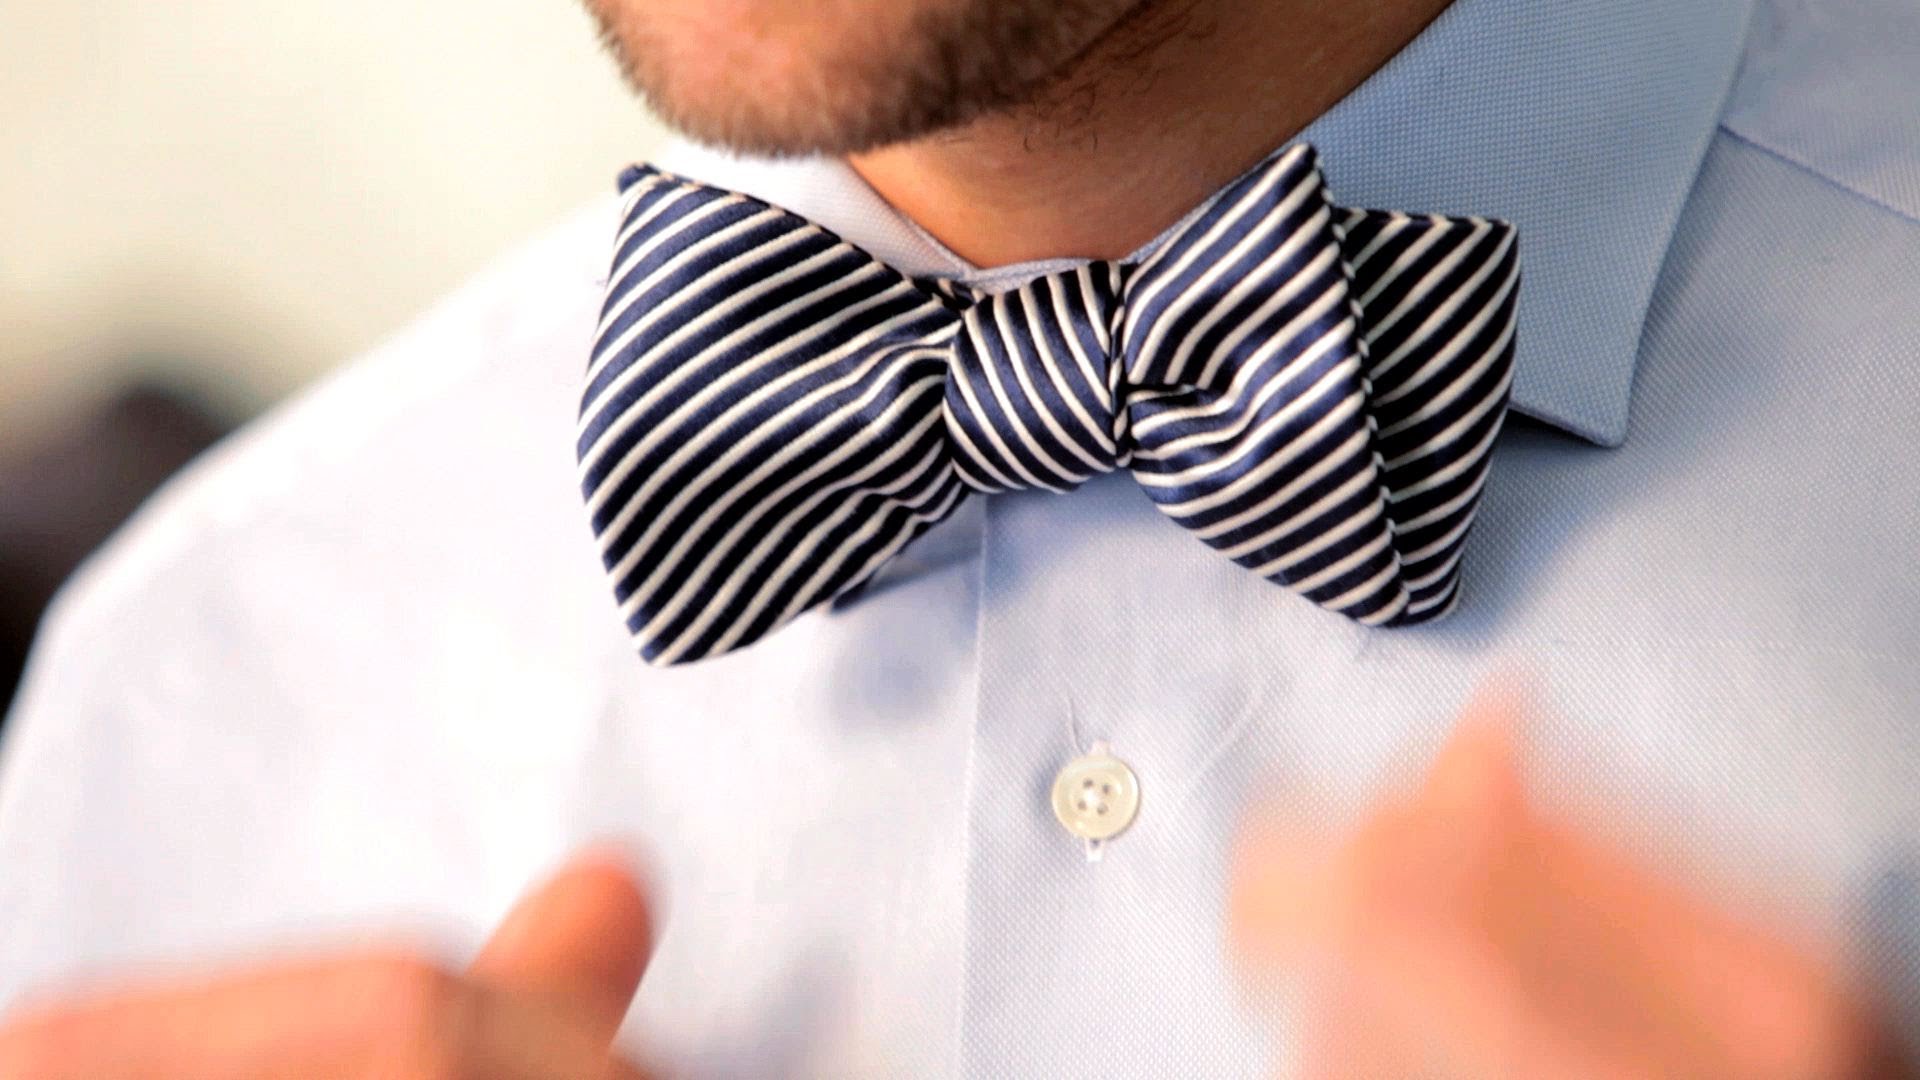 Why do bow ties become popular?